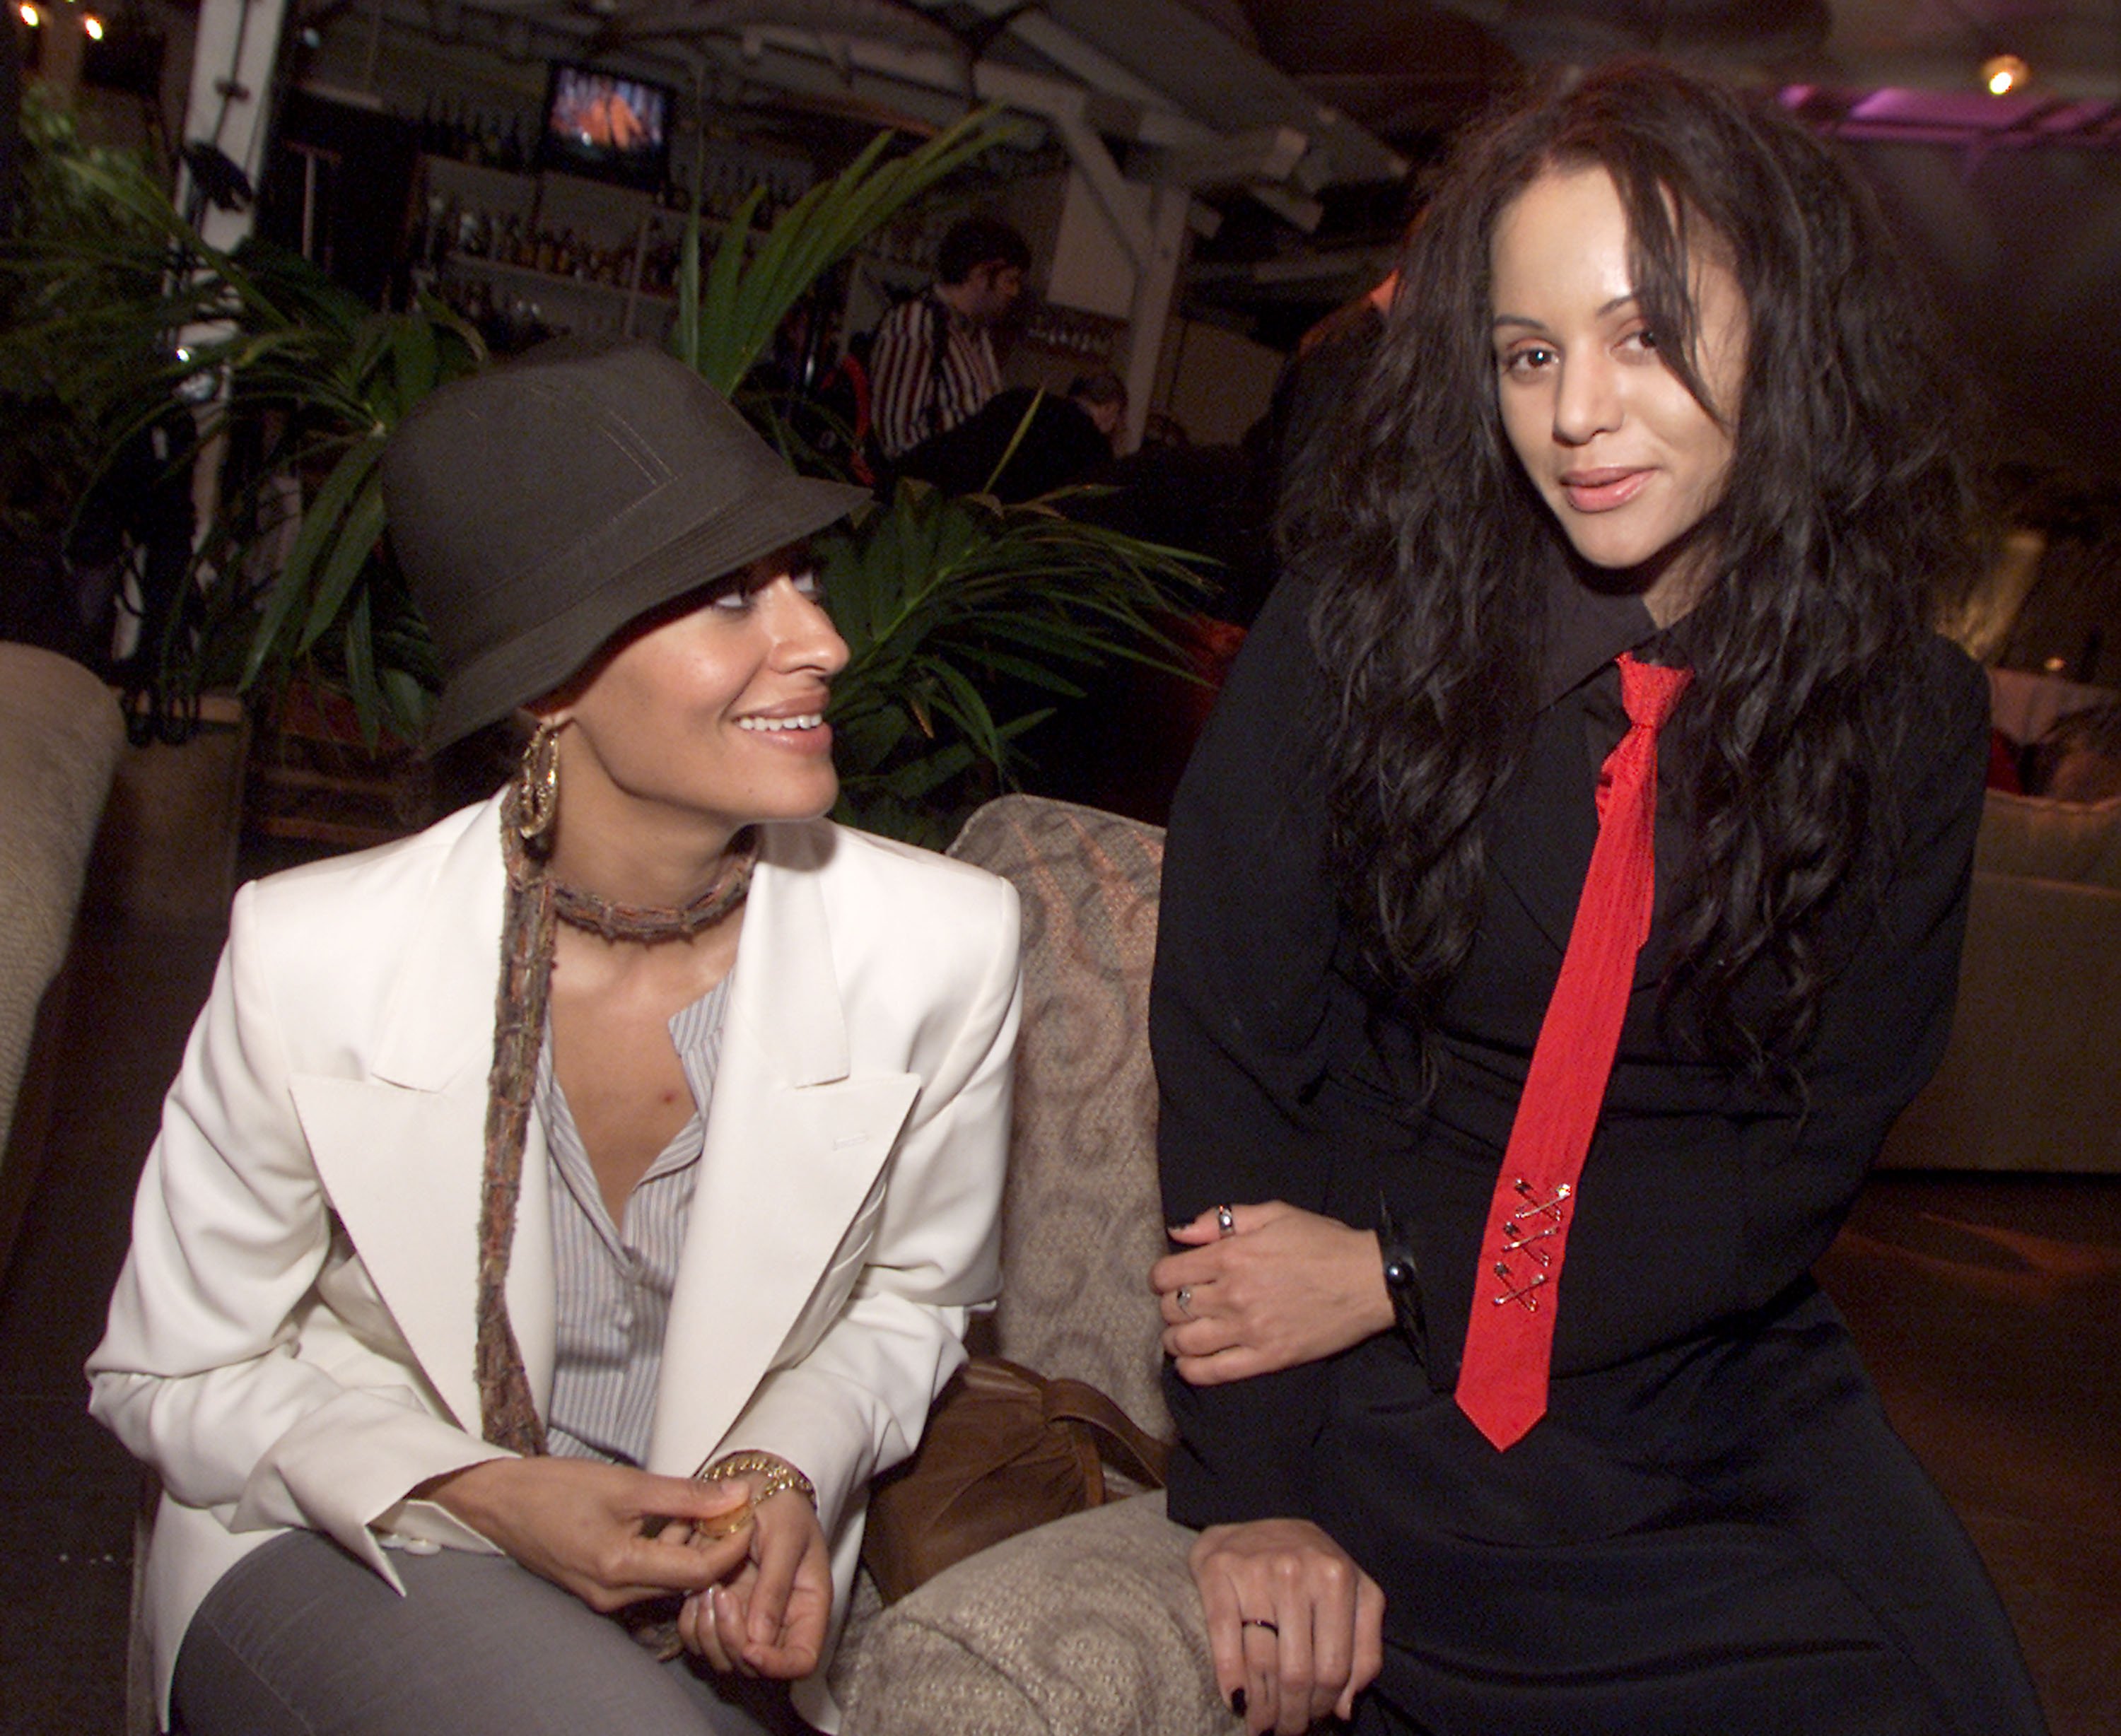 'Girlfriends' cast members Tracee Ellis Ross and Persia White at an event.